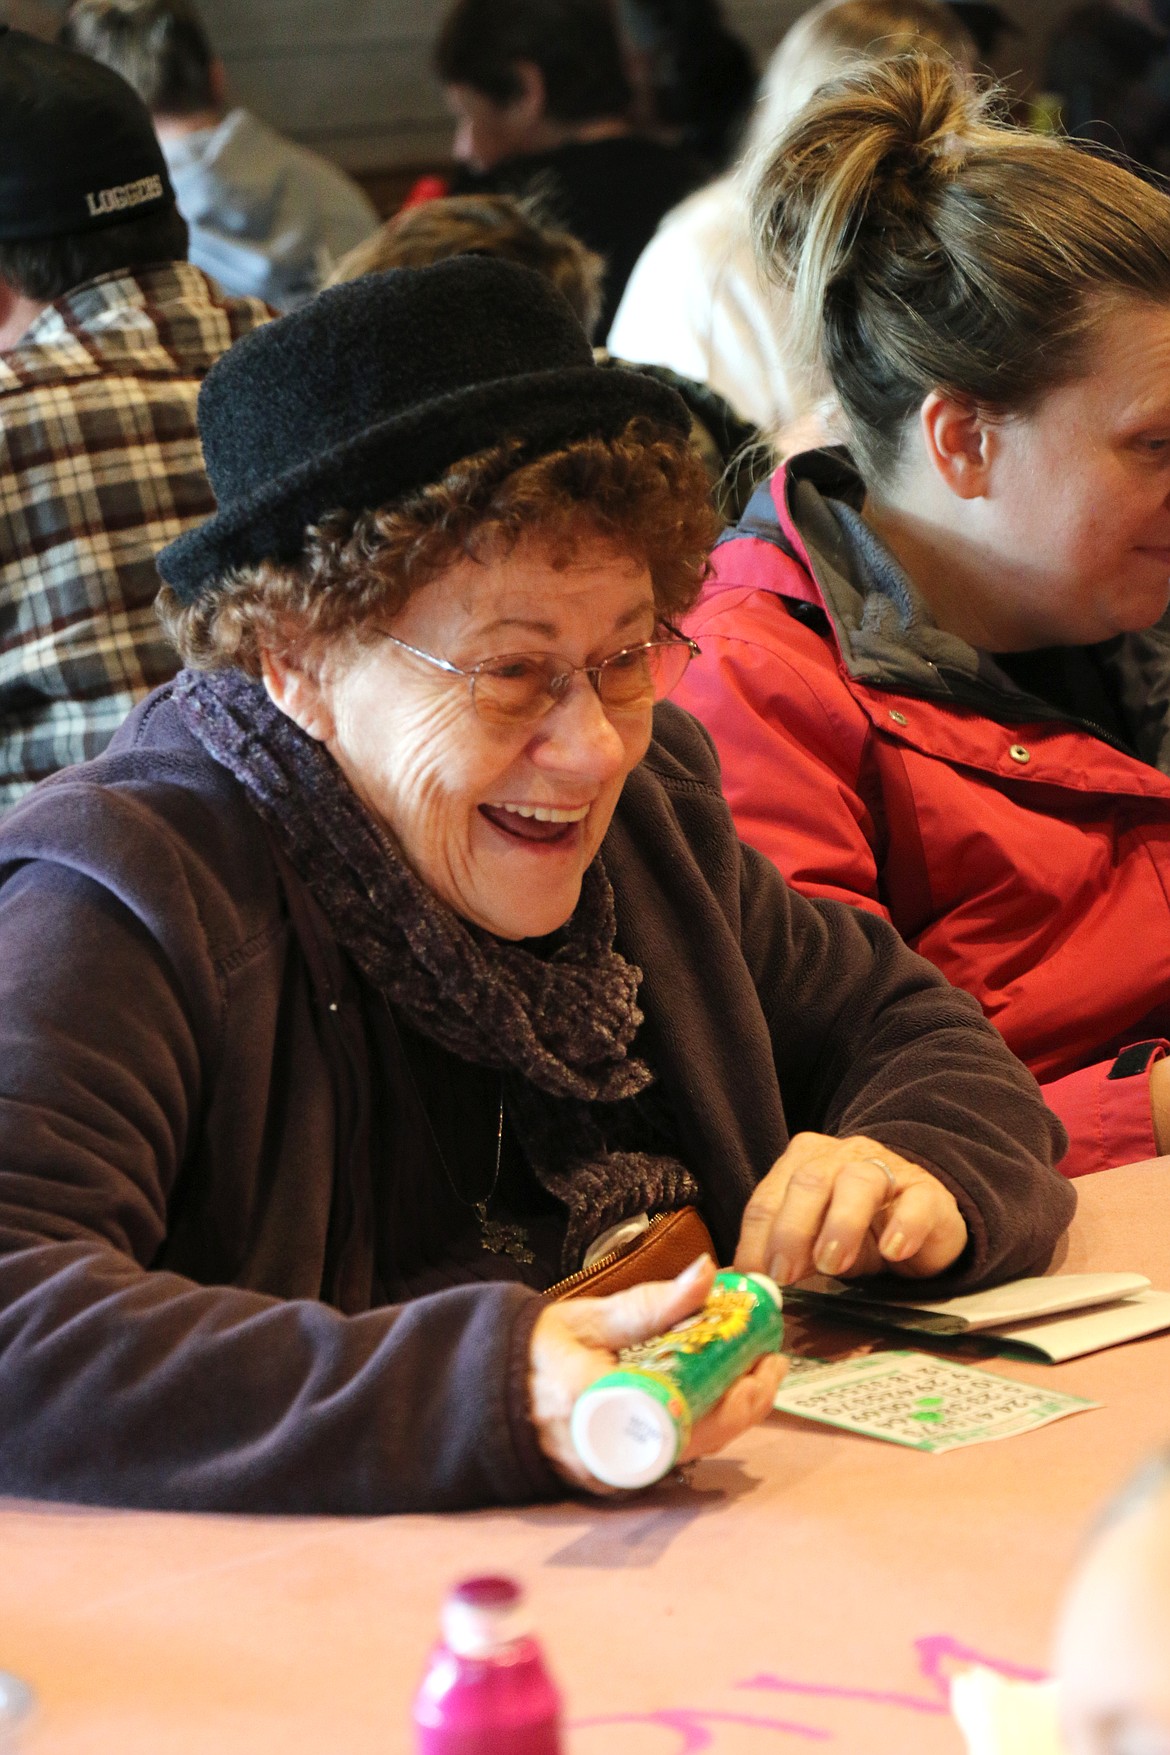 A bingo player laughs while talking with friends and family at Saturday's Turkey Bingo game. The annual Sandpoint Lions' fundraiser is held to raise money for the club's Toys for Tots Christmas campaign.